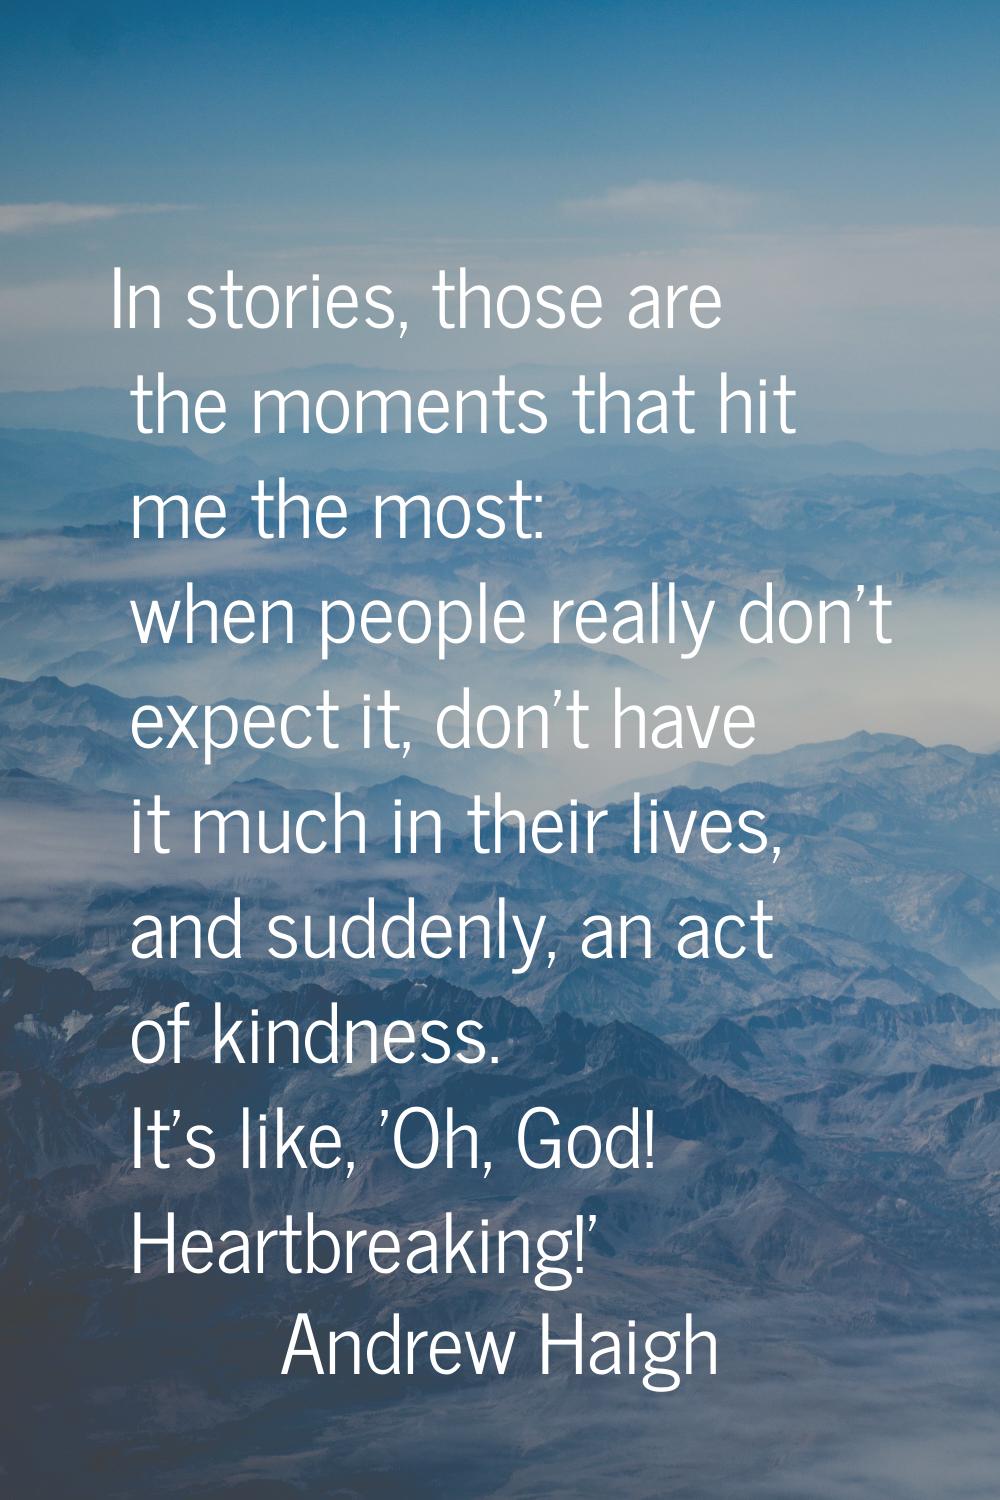 In stories, those are the moments that hit me the most: when people really don't expect it, don't h